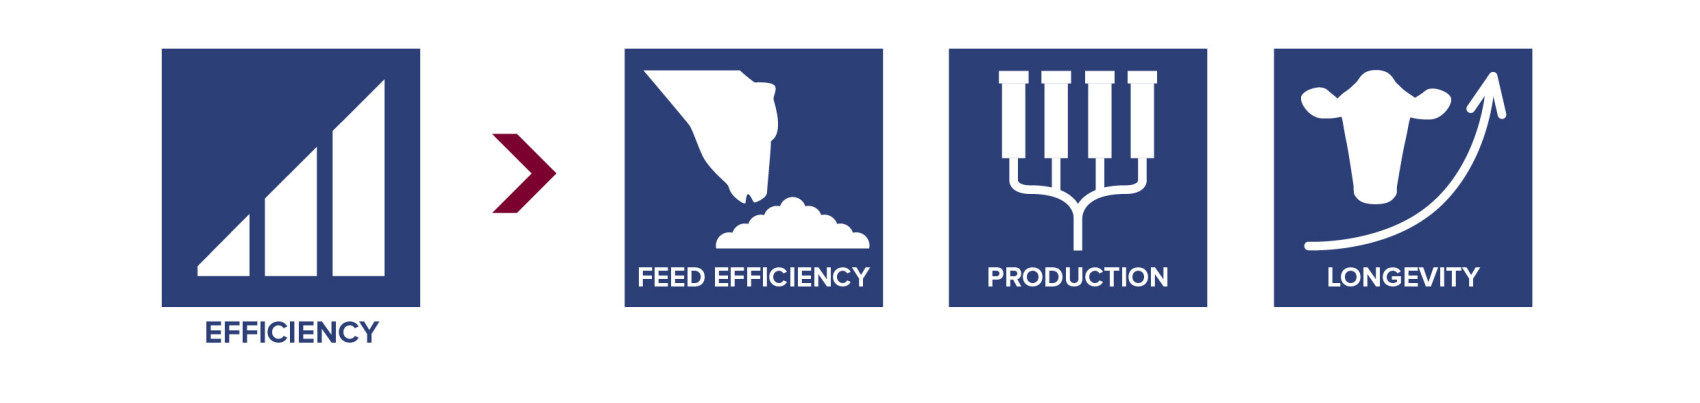 Besides Production and Lifetime, Feed Efficiency is 1 of the 3 important building blocks of CRV Efficiency.  Because an efficient cow is productive, with a high lifetime production, and efficiently converts feed into milk, fat and protein.